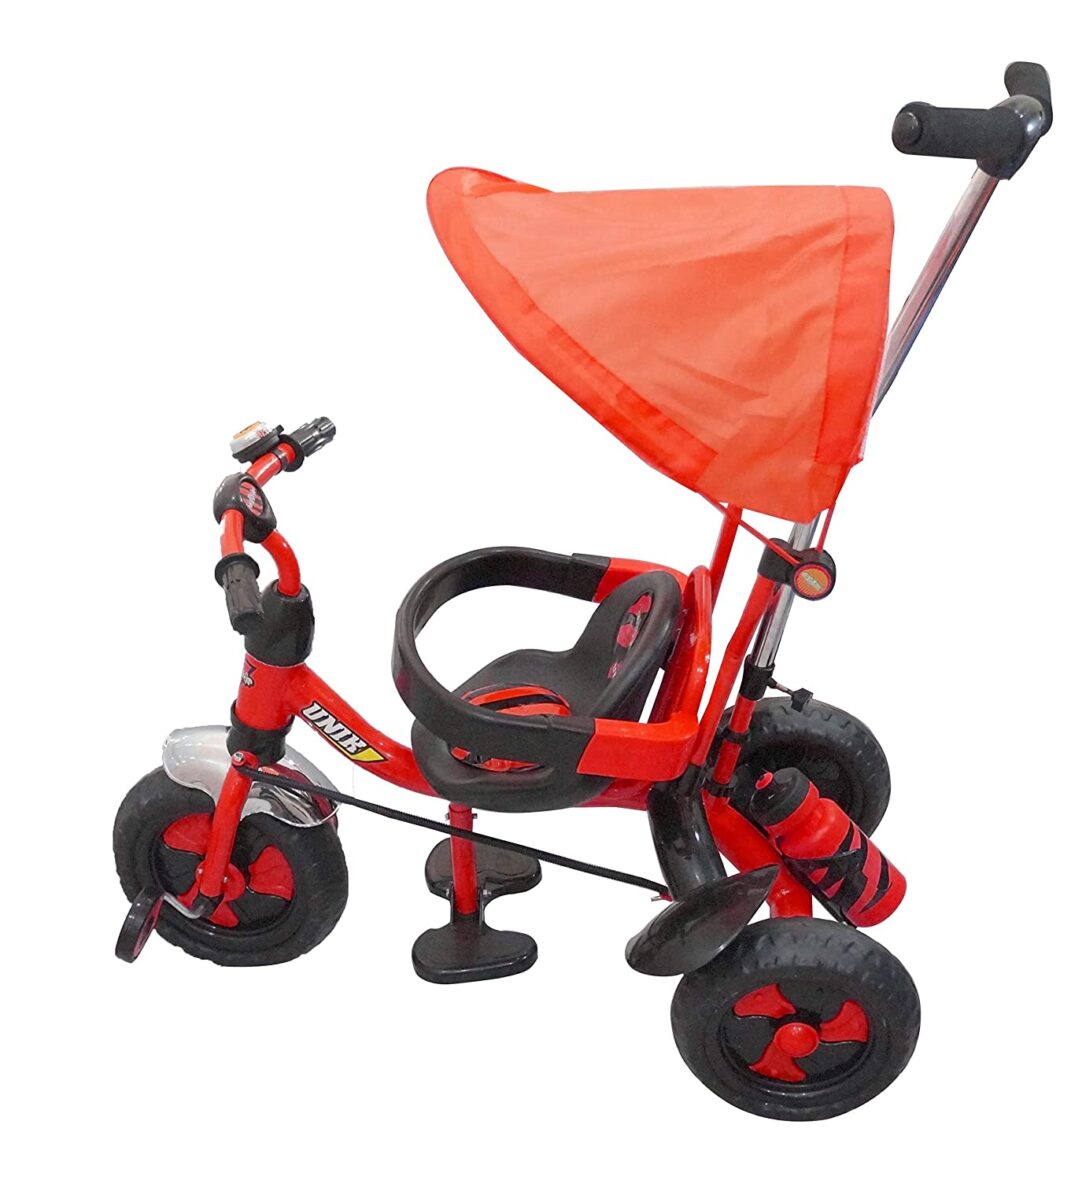 Fun Ride Baby Tricycle Unik Deluxe Rider 1 to 4 Years (16)